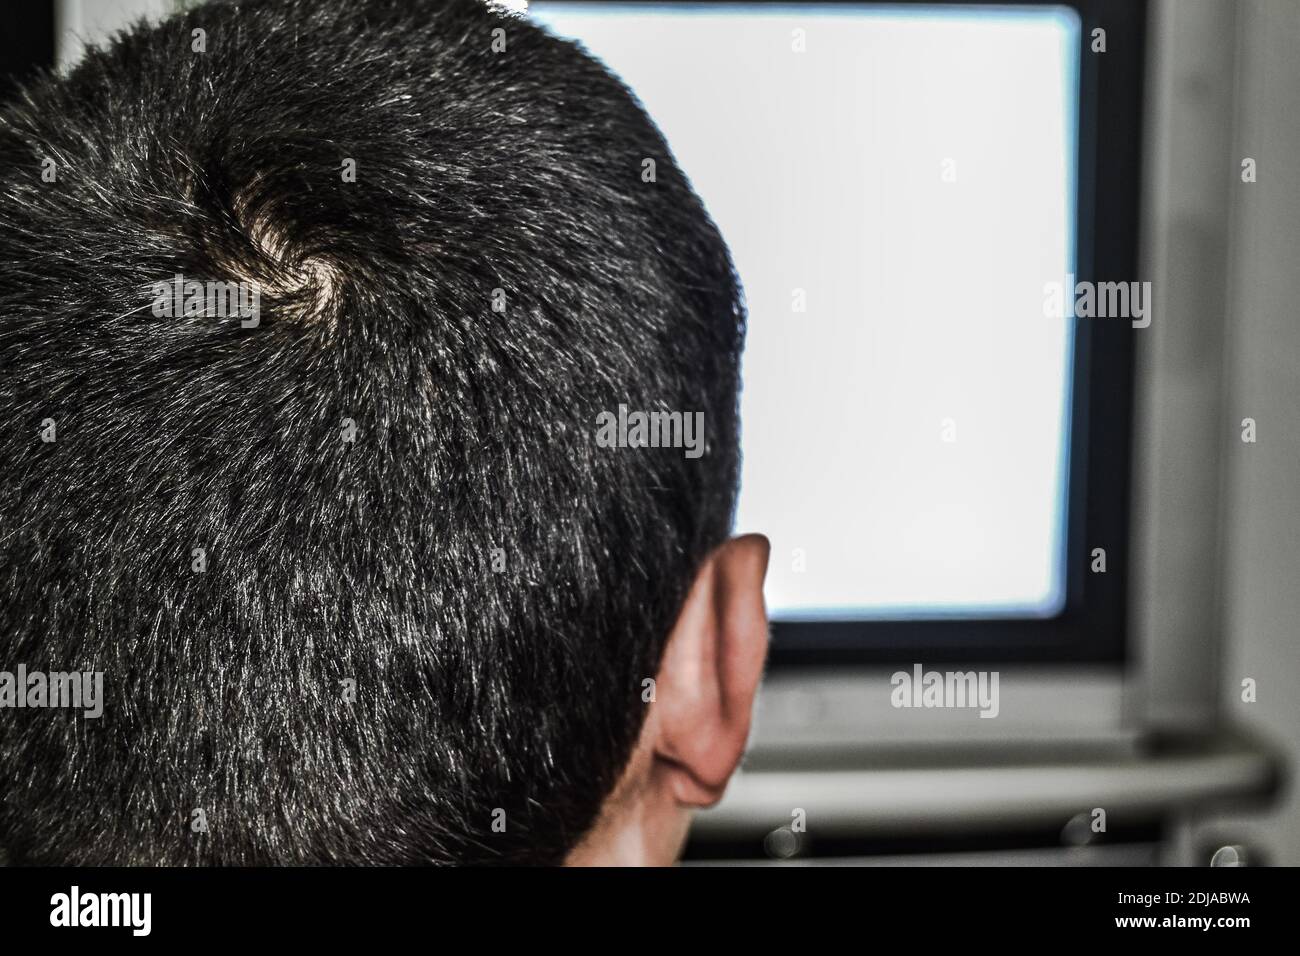 A alone man is watching television. Photo shows behind of the man and his head and also in old style and tube television TV there is grainy screen. Stock Photo